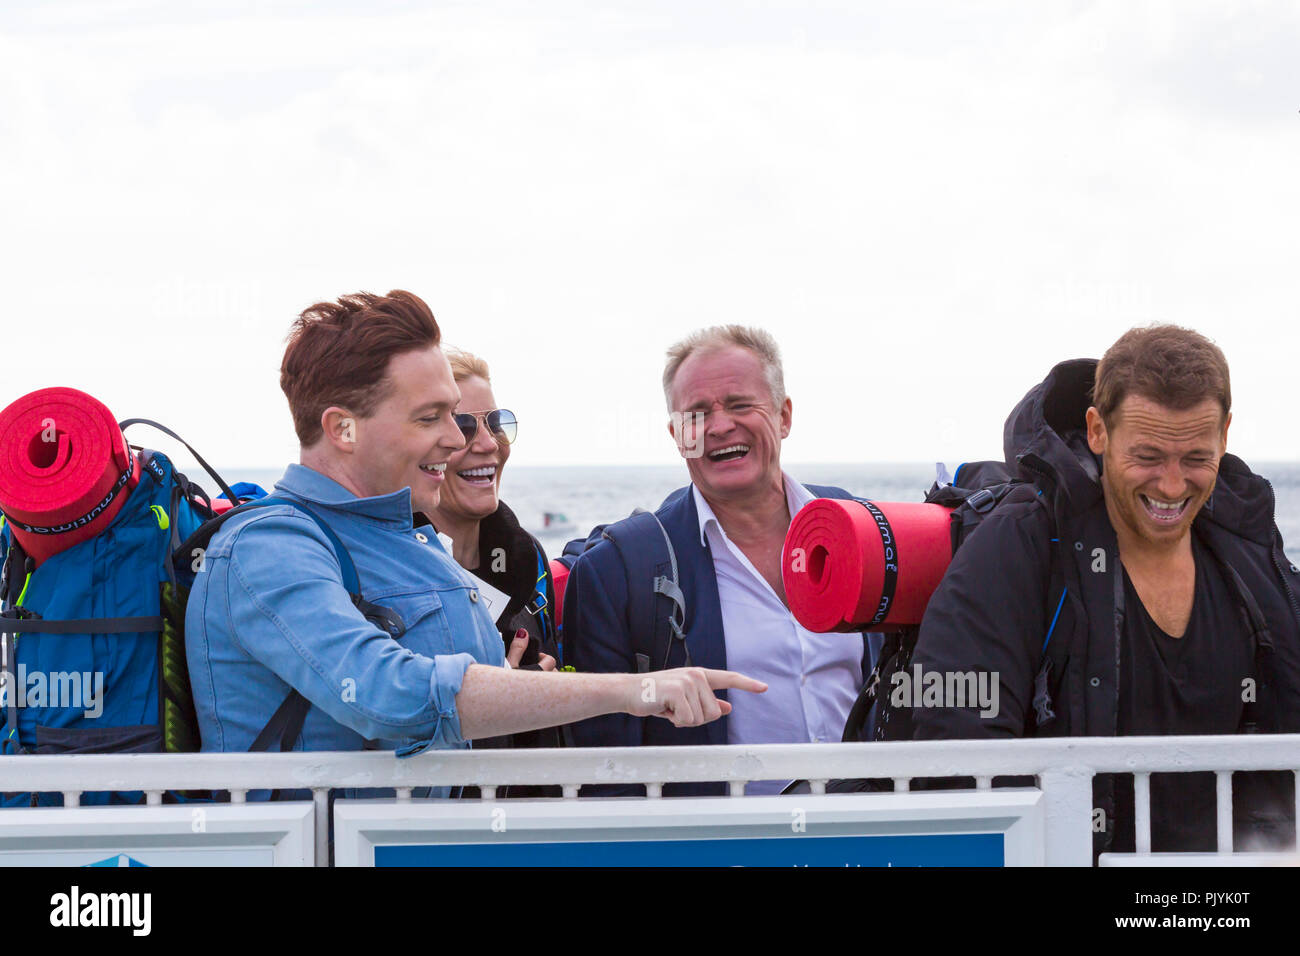 Poole, UK. 09th Sep, 2018. Celebrities  Bobby Davro, Stephen Bailey,  Joe Swash and Michelle Collins take the Bramble Bush Ferry chain ferry from Sandbanks across to Studland, carrying backpacks ready for ‘camping it up’ at Burnbake for a new TV series. Credit: Carolyn Jenkins/Alamy Live News Stock Photo